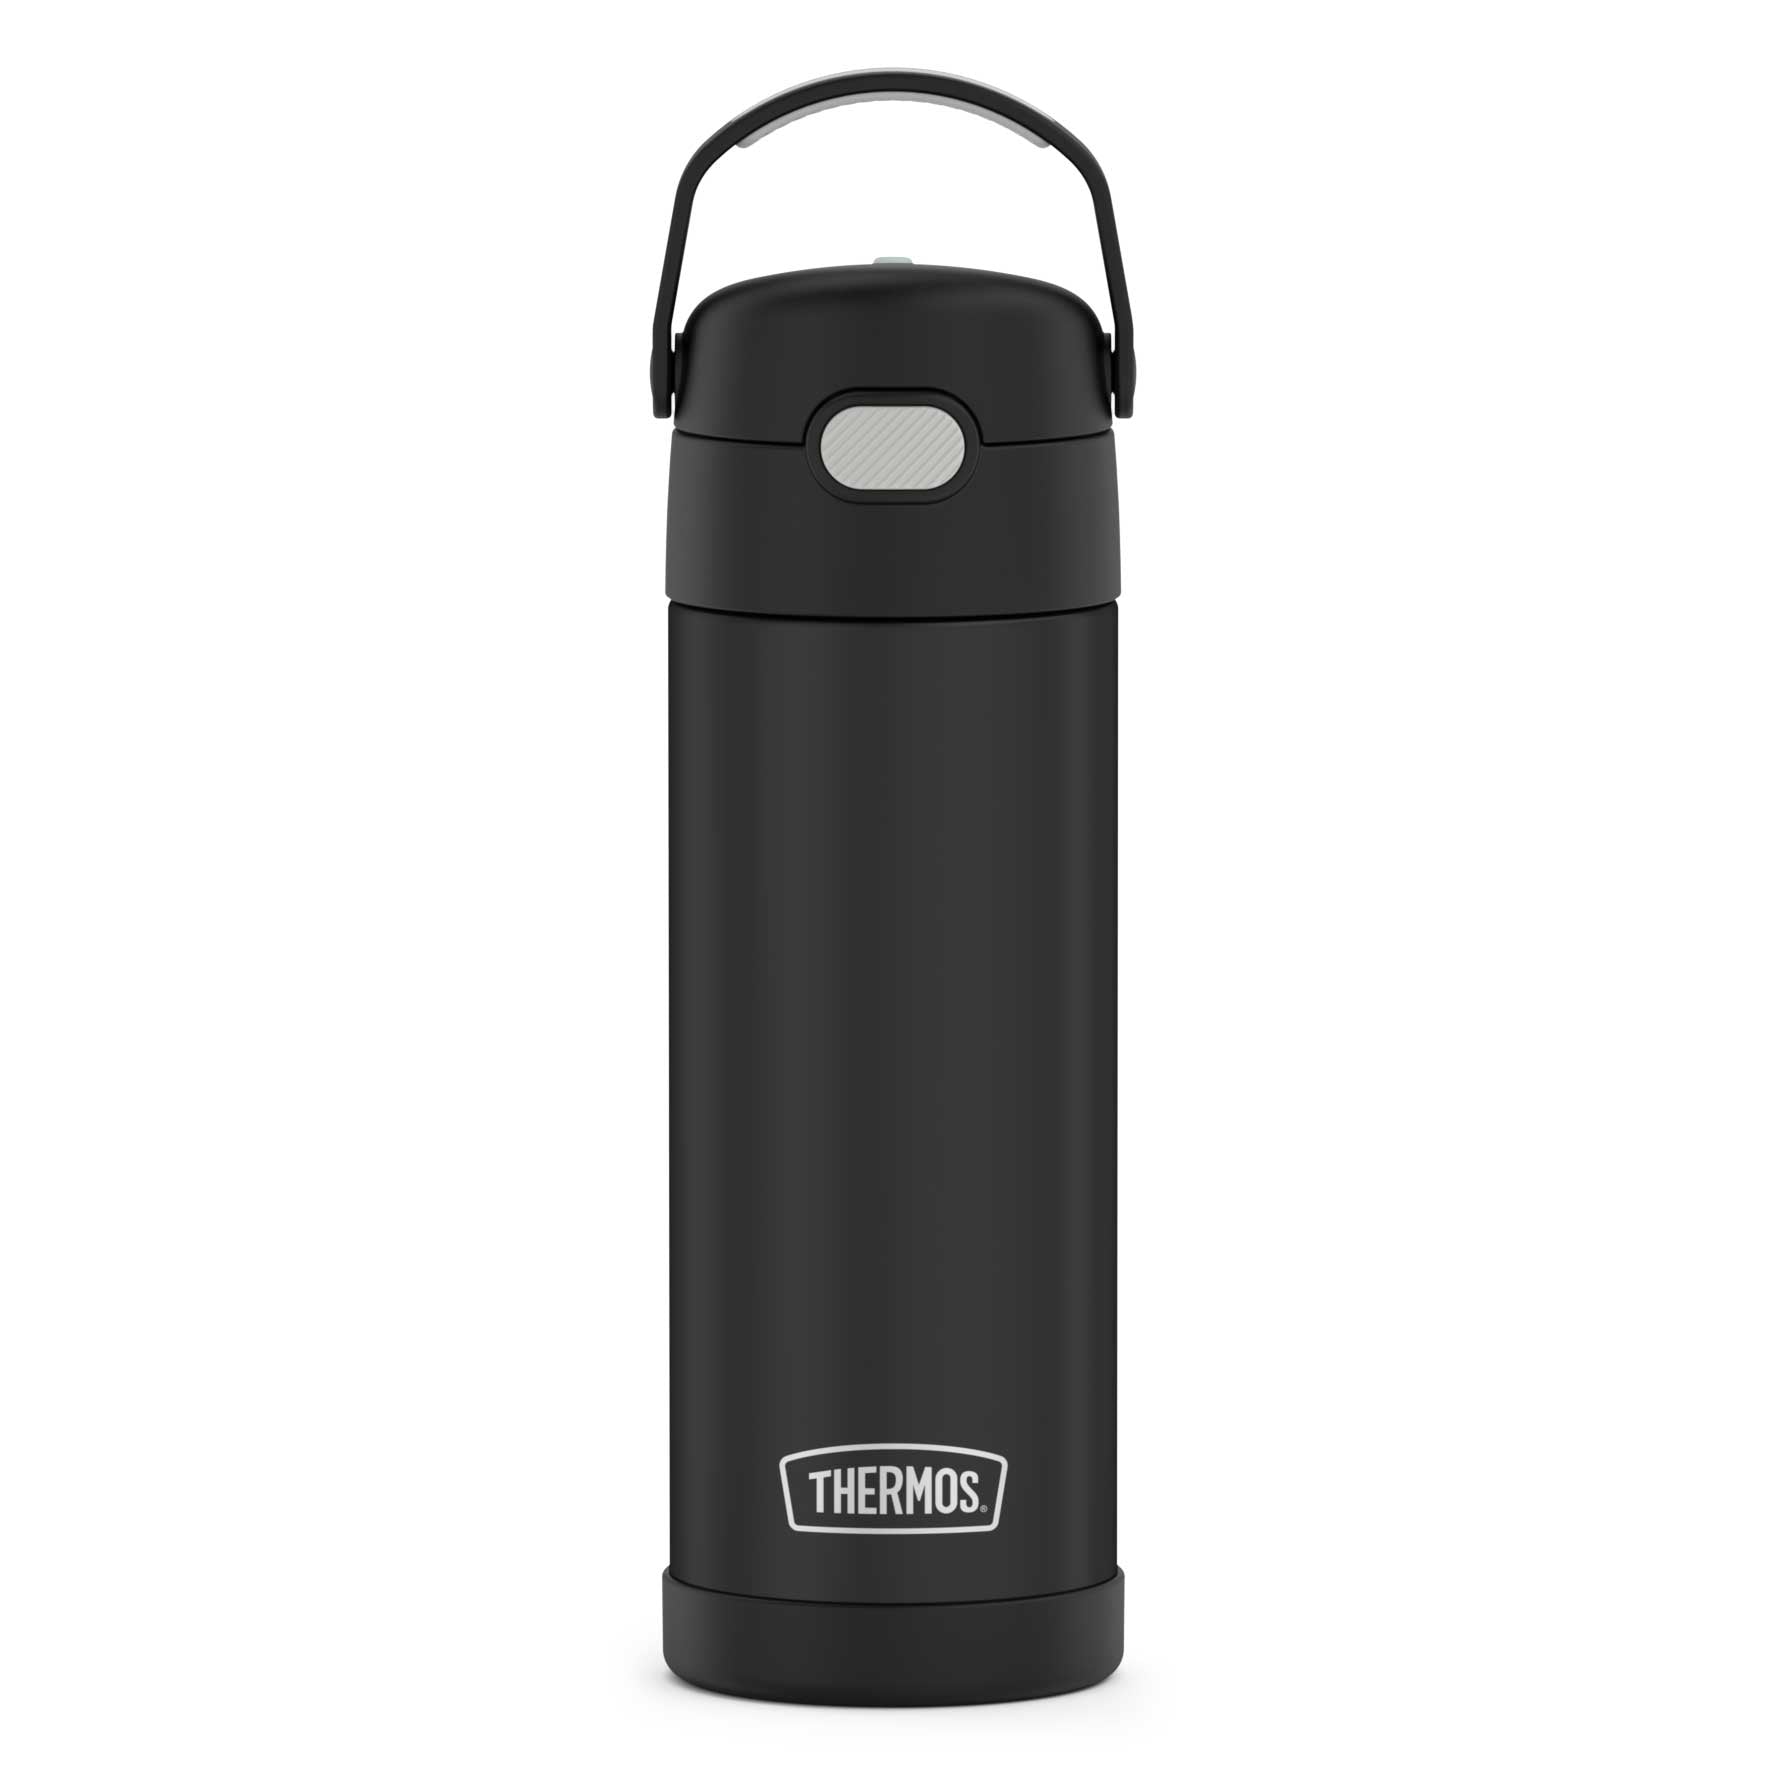 Kids Stainless Steel Thermos Water Bottle Keeps Drinks Hot & Cold All Day  Large 12oz. Capacity,Easy Button Pop Lid for Toddler,Double Wall insulated